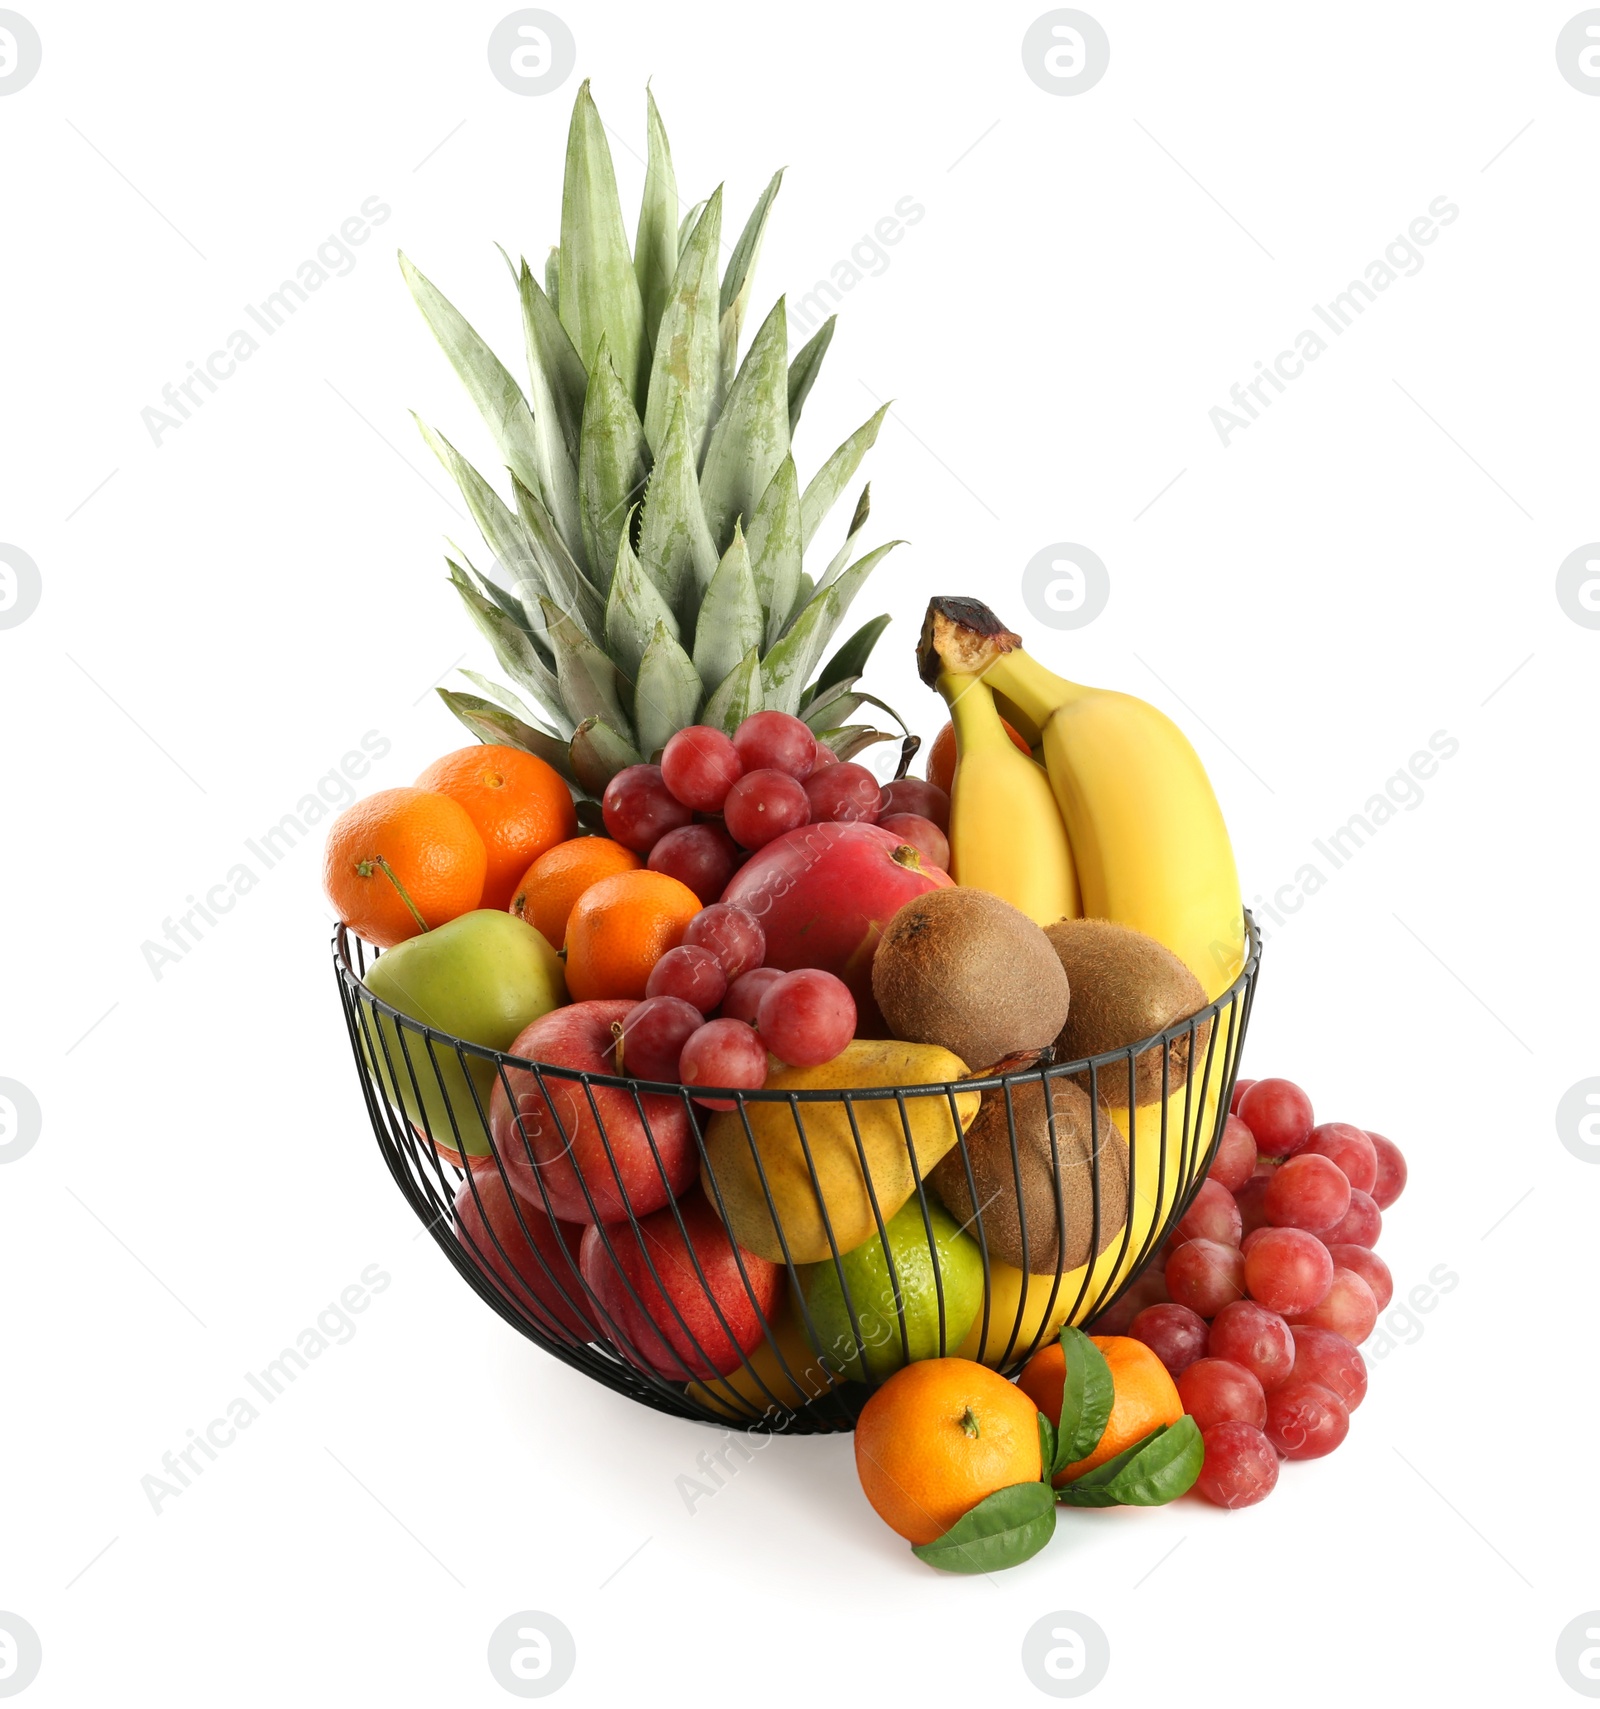 Photo of Metal bowl with different fresh fruits isolated on white